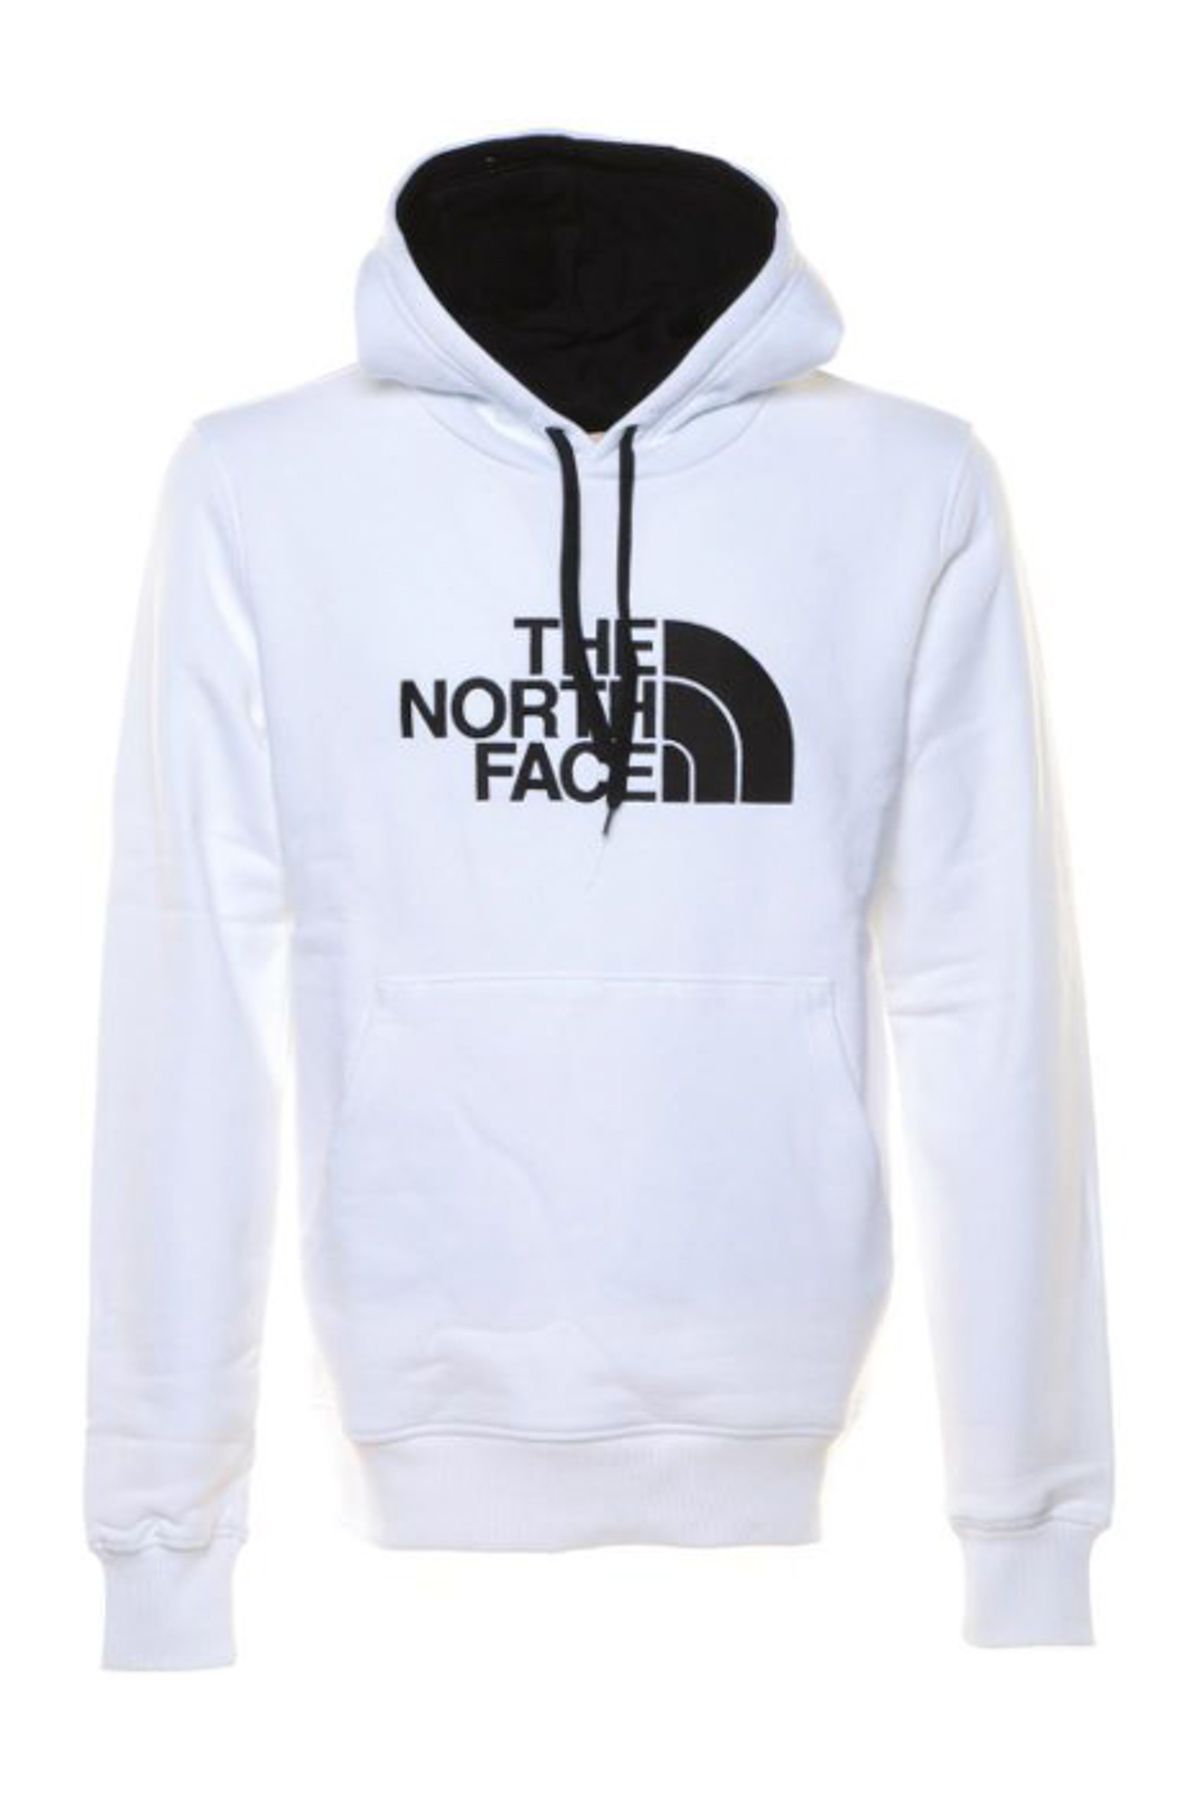 The North Face M Drew Peak PLV HD NF00AHJYLA91